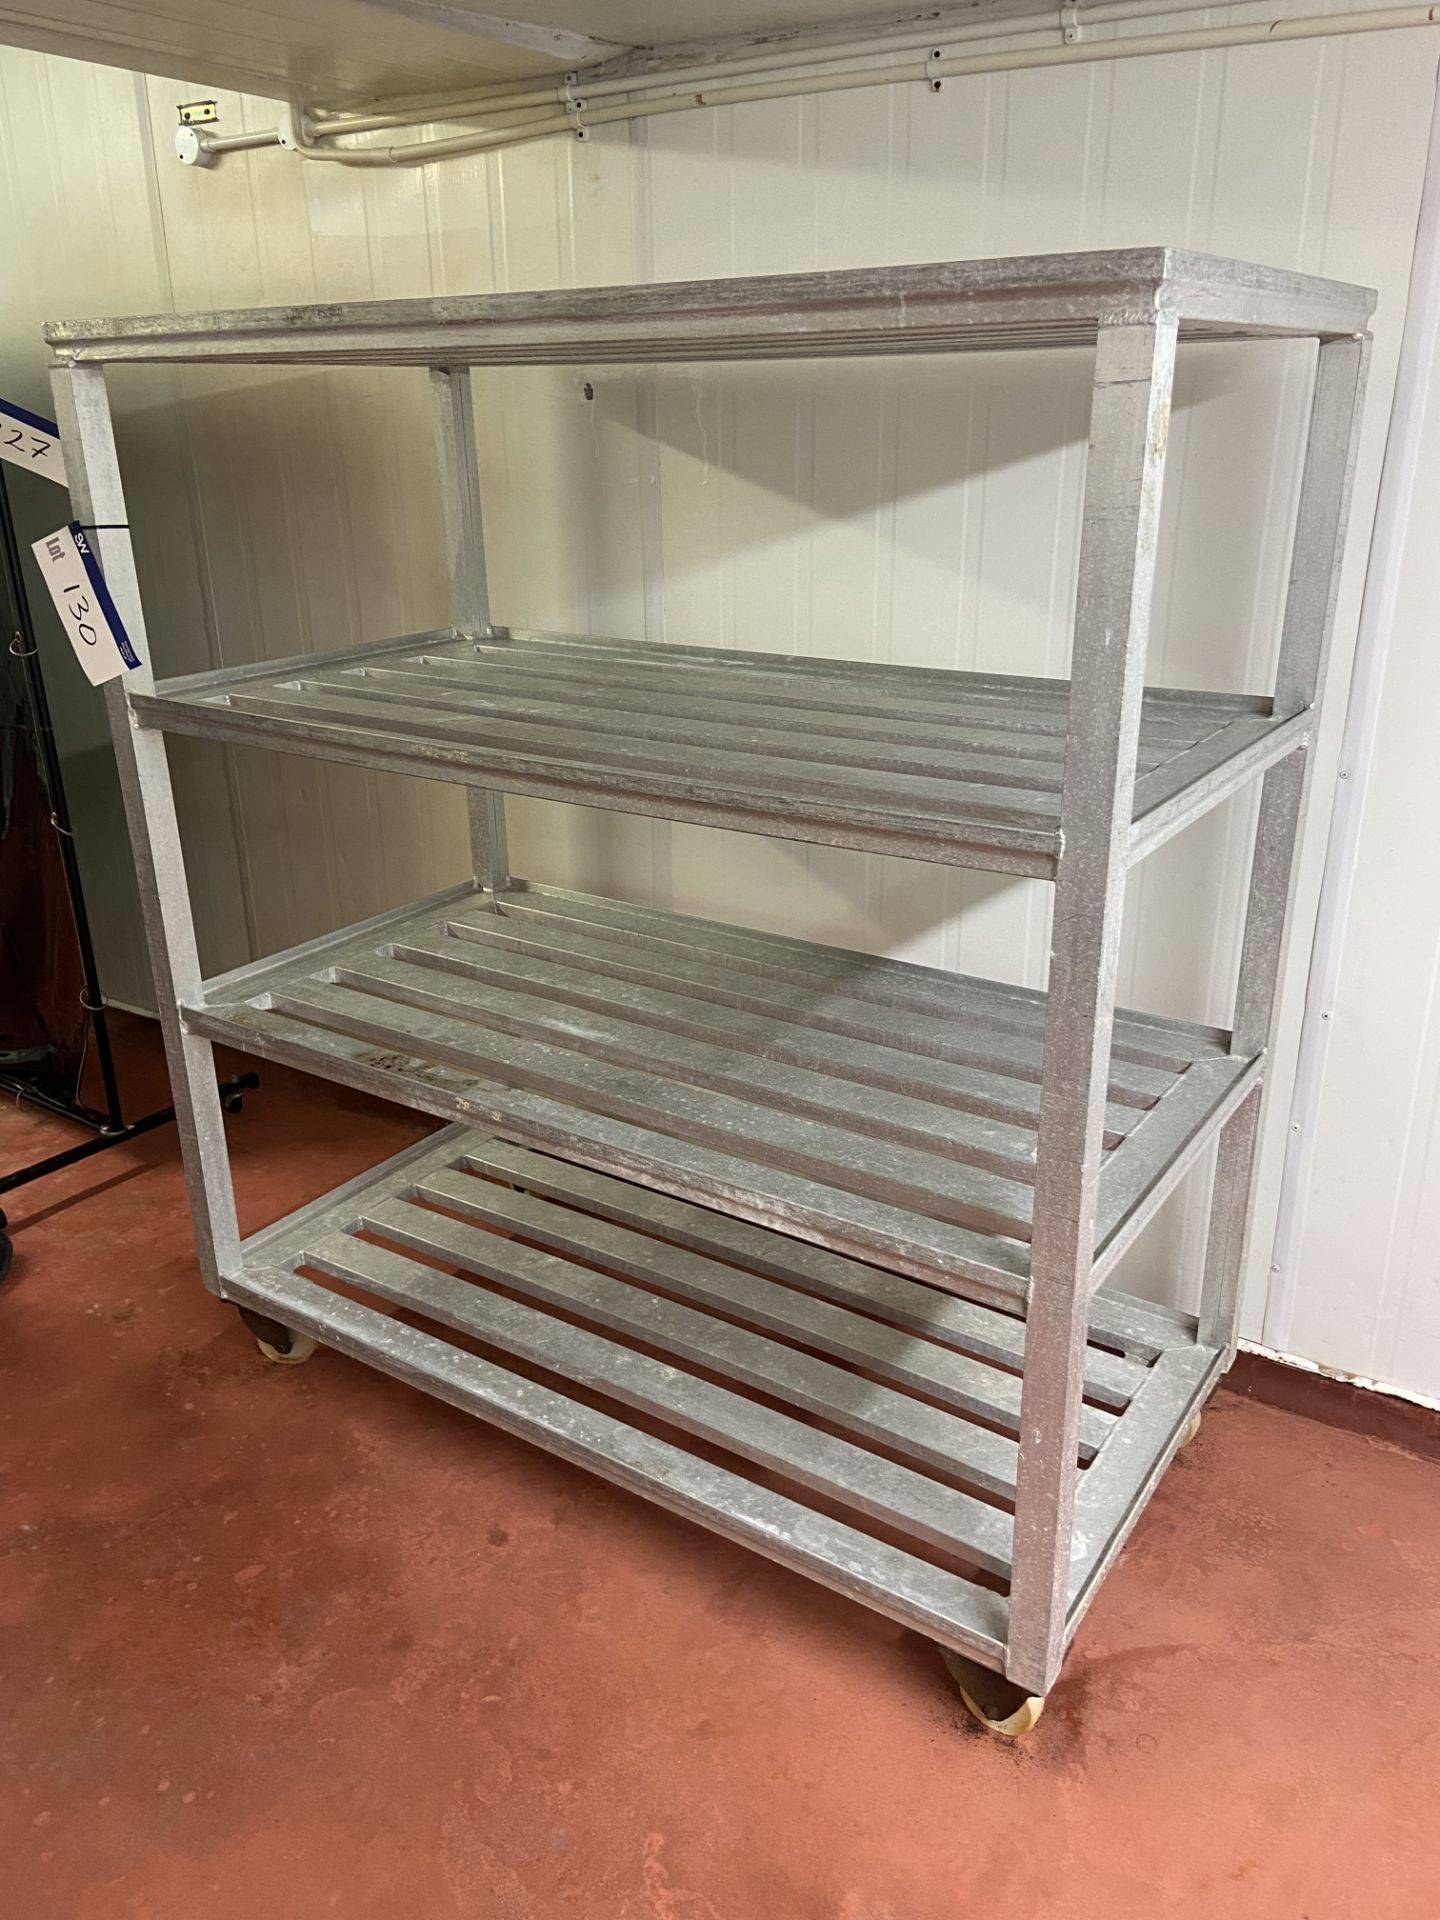 Four Tier Mobile Alloy Rack, approx. 1.52m x 760mm x 1.6m high Please read the following important